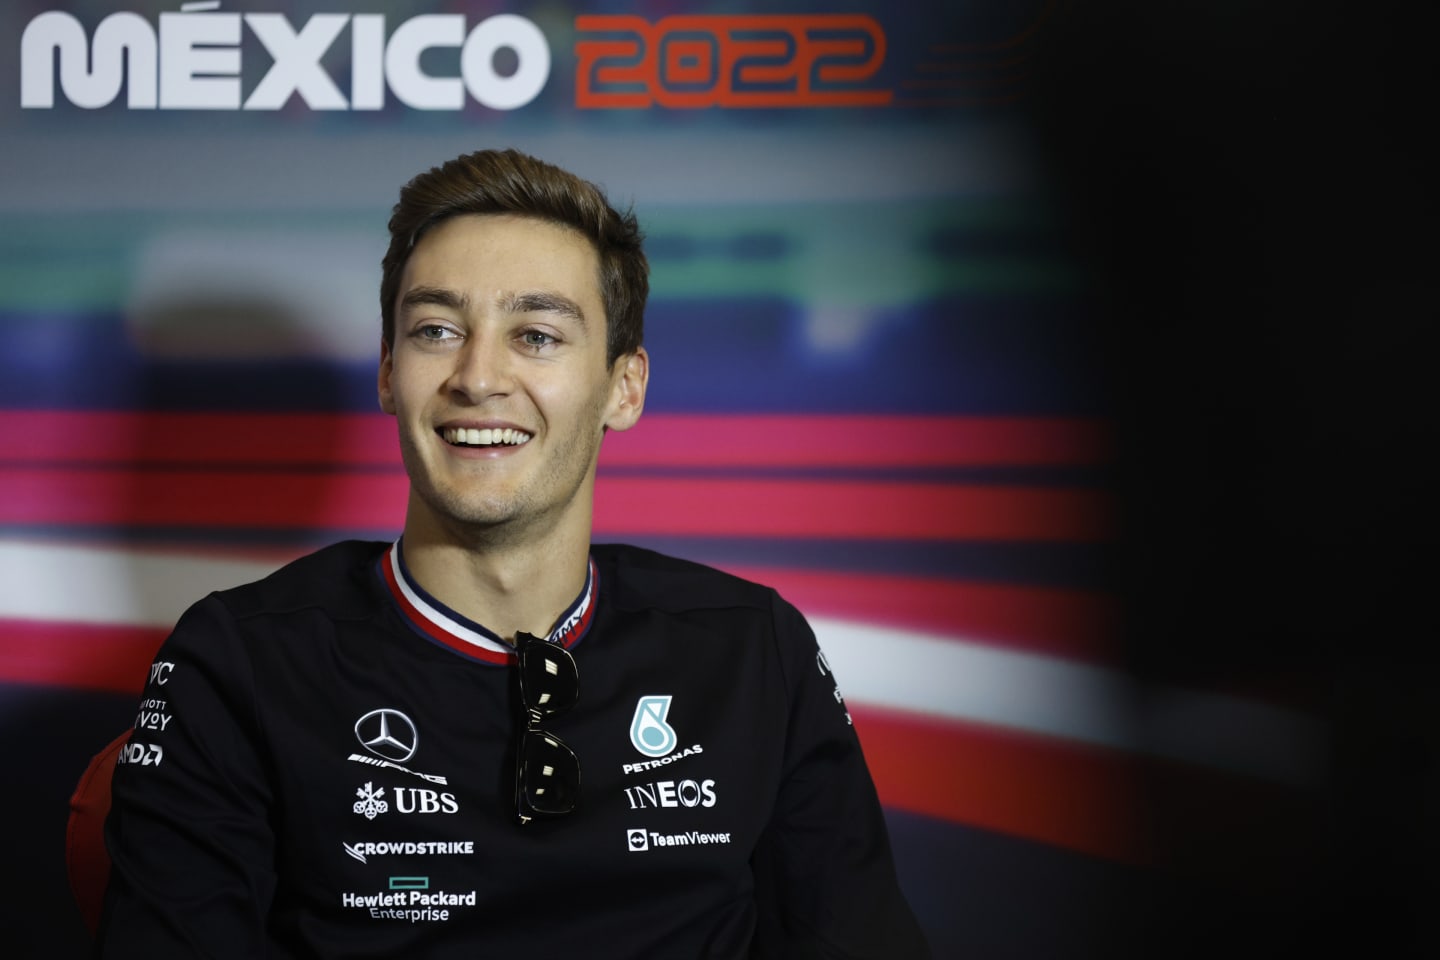 MEXICO CITY, MEXICO - OCTOBER 27: George Russell of Great Britain and Mercedes attends the Drivers Press Conference during previews ahead of the F1 Grand Prix of Mexico at Autodromo Hermanos Rodriguez on October 27, 2022 in Mexico City, Mexico. (Photo by Jared C. Tilton/Getty Images)